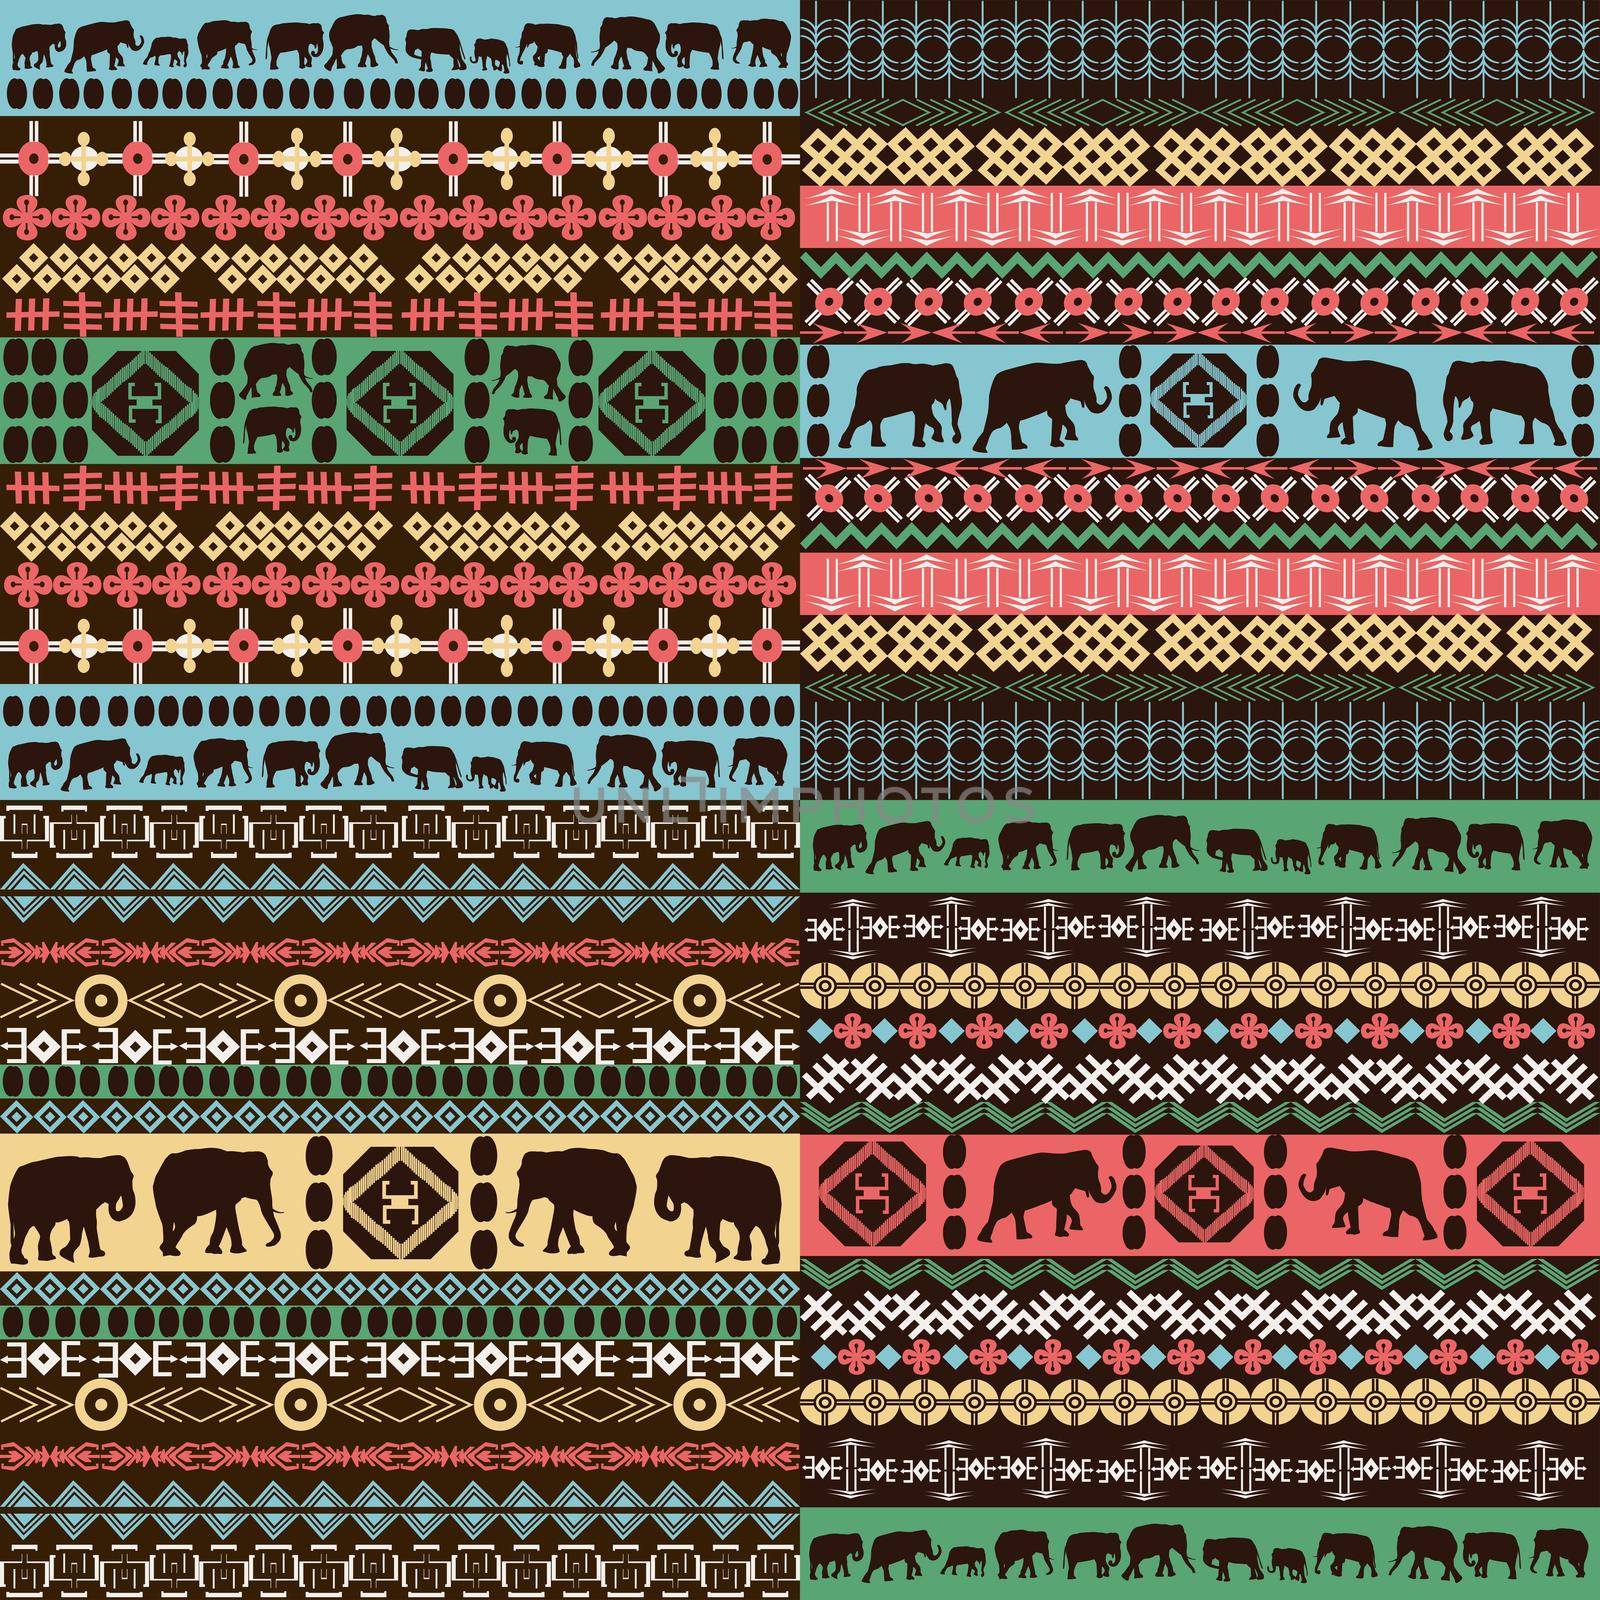 Colorful african patterns with elephants silhouettes by hibrida13